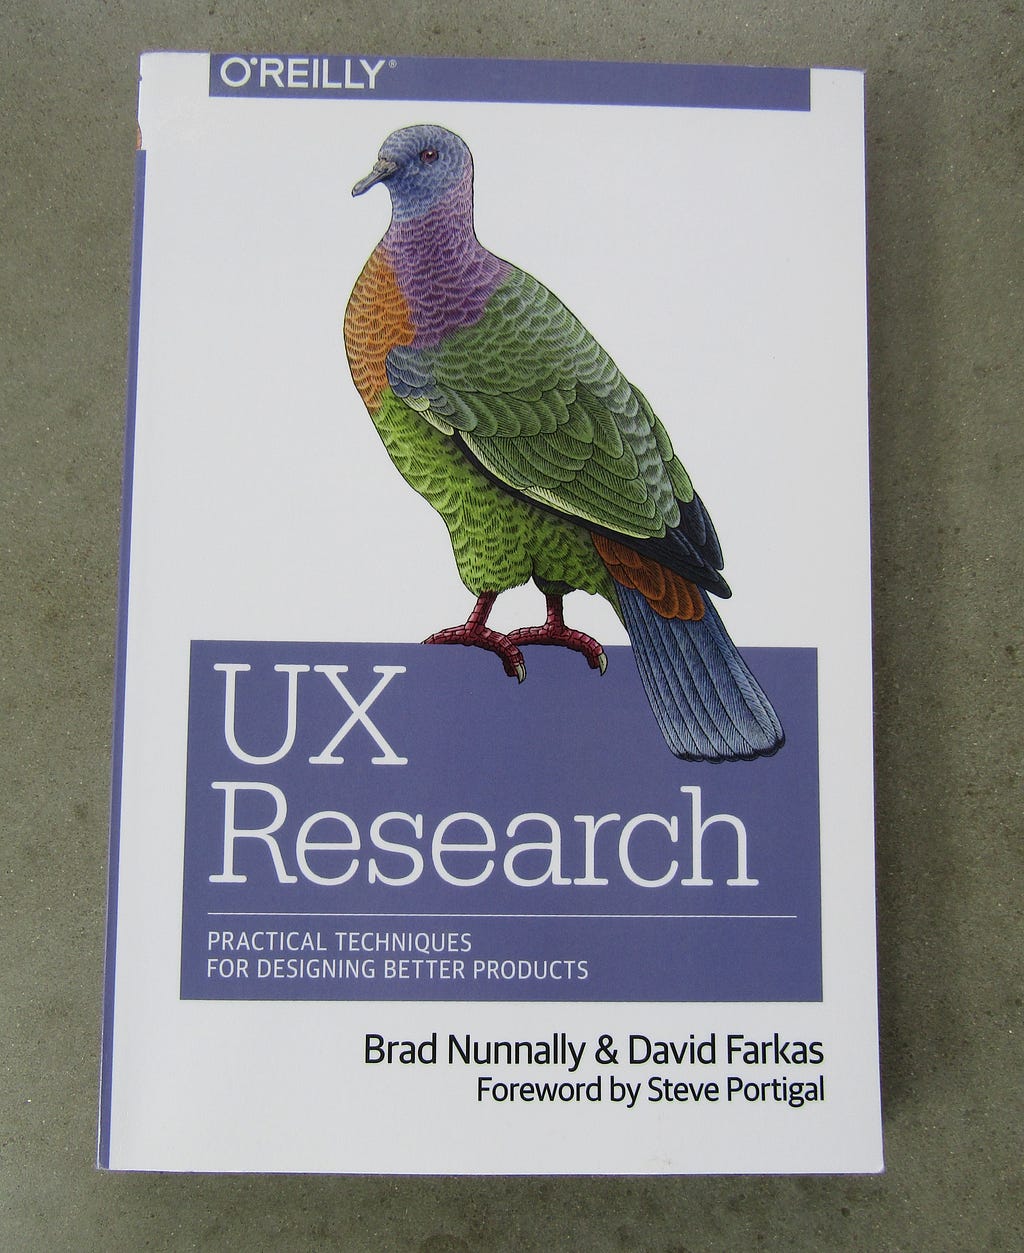 UX Research by Brad Nunnery and David Farkas